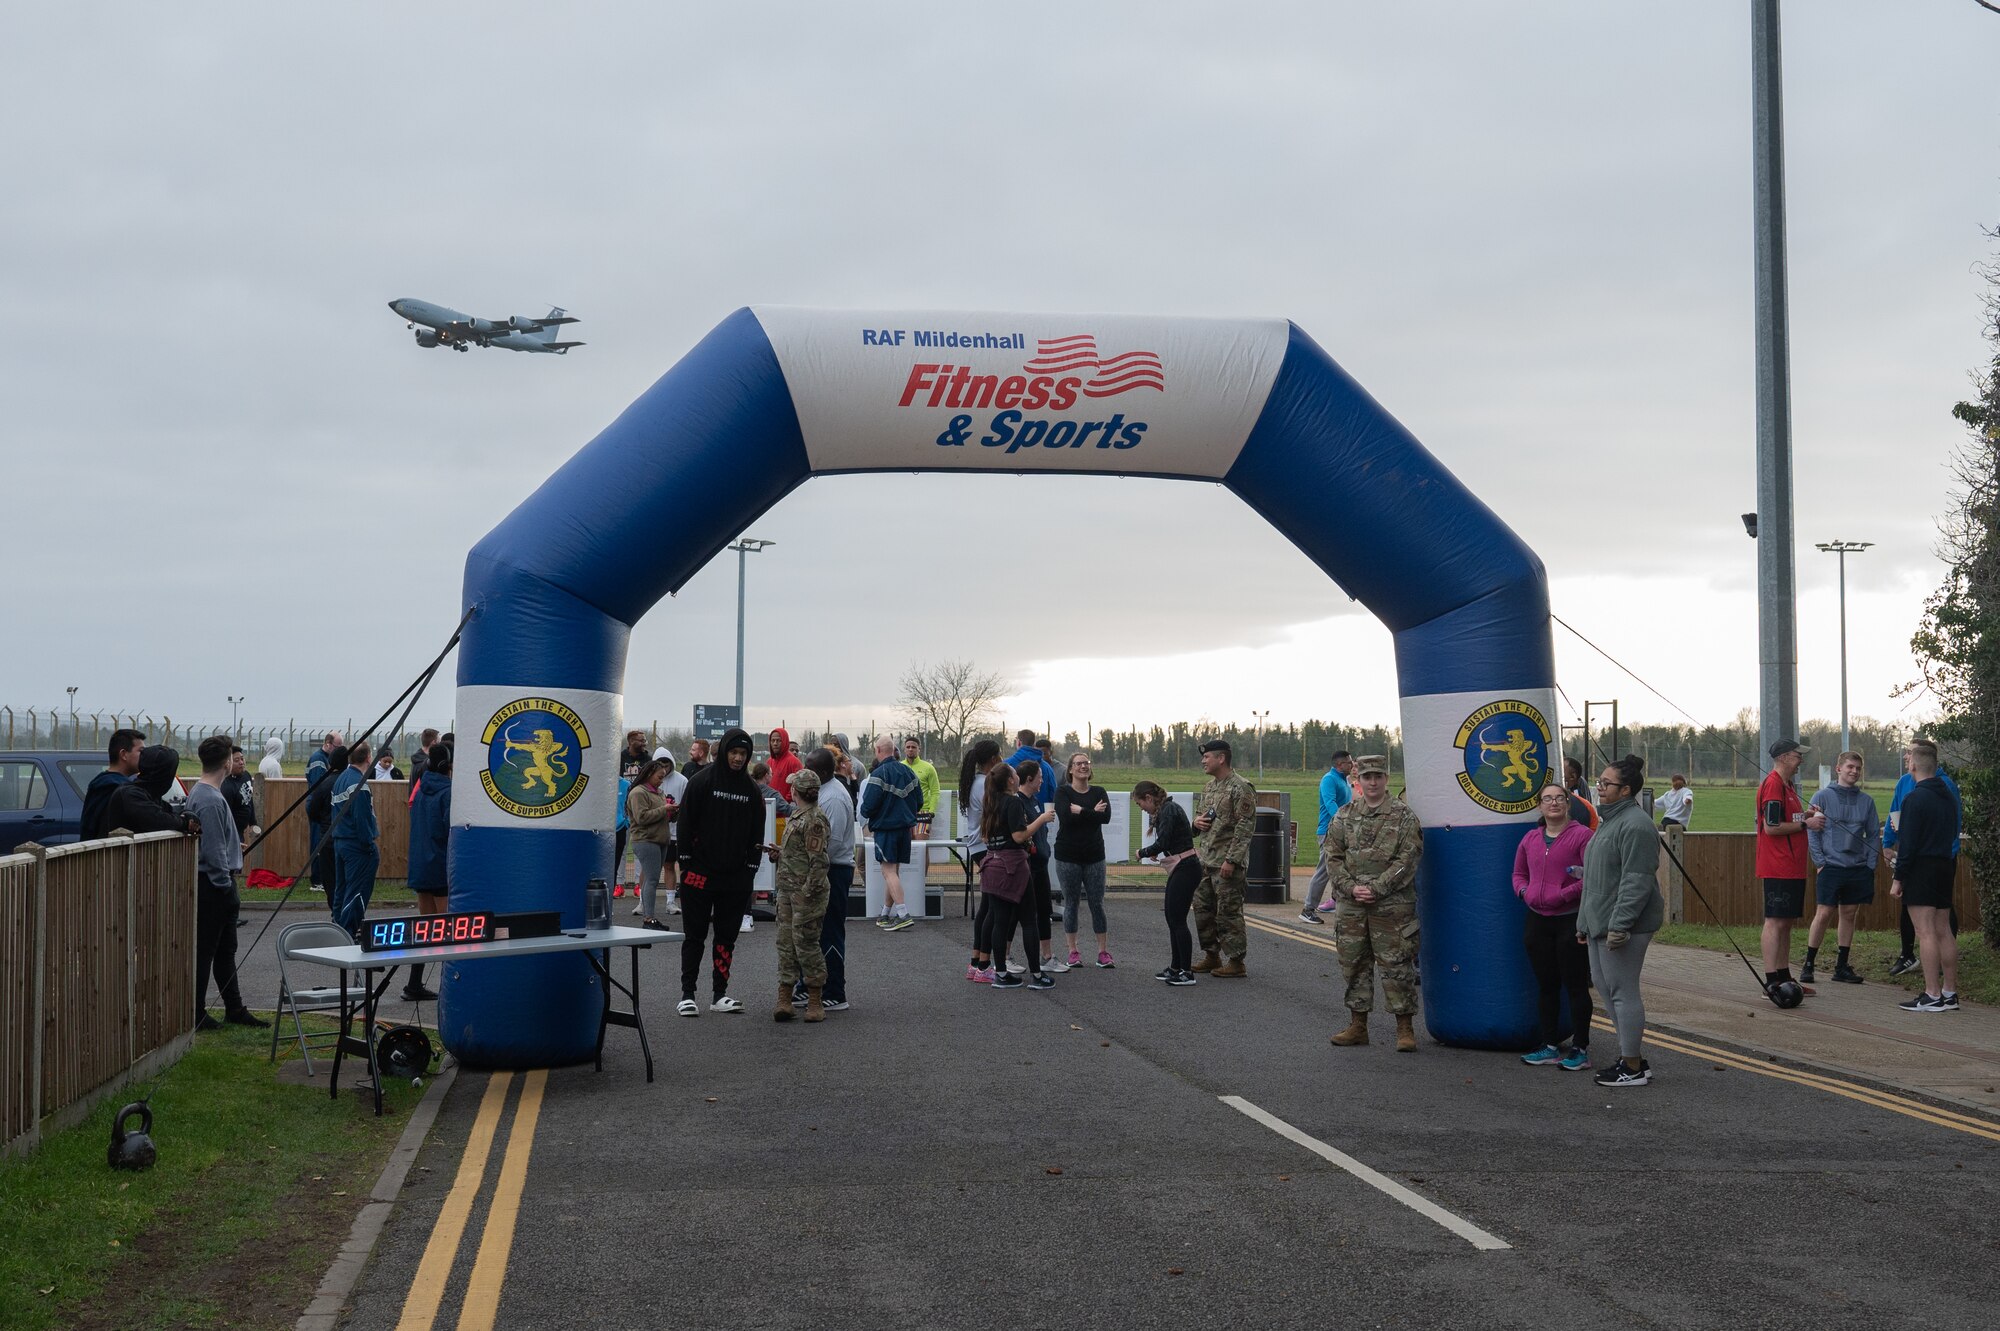 U.S. Air Force service members, spouses and family, stand at the finish line of the Black History Month 5K run and walk, Feb. 23, 2023, at Royal Air Force Mildenhall, England.